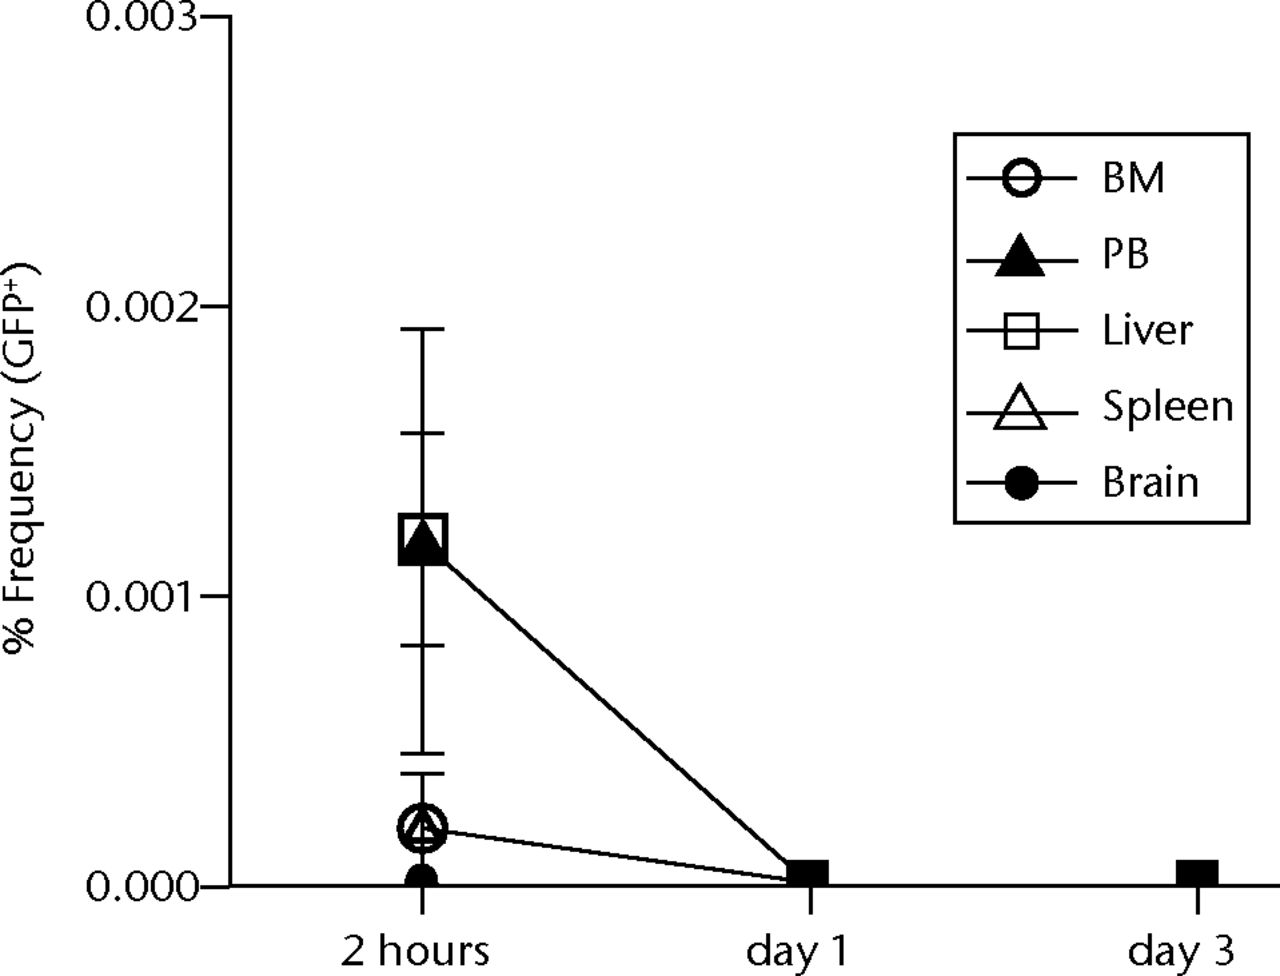 Figs. 5a - 5d 
          
            Figure 5a – Graph showing percentage
of GFP-positive cells in lung at two hours, one and three days after intravenous
infusion (n = 4 or 5 each). Values are presented as standard error
of the mean (SEM). Figure 5b – Graph showing percentage of GFP-positive
cells in BM, PB, liver, spleen and brain at two hours, one and three days
after intravenous infusion (n = 4 or 5 each). Values are presented
as standard error of the mean (SEM). Figure 5c – Representative
macroscopic images of the GFP expression in lung (left) and liver
(right) at two hours (i.v.-2h) and three days (i.v.-3d) after intravenous
infusion. PBS without osteoblast-like cells was used as a negative control,
whereas GFP-Tg rat was used as a positive control. Nuclei were stained with
DAPI. Figure 5d – Bar graph showing quantification of the GFP gene
by real-time PCR. Copy numbers of GFP were normal to that of GAPDH.
PBS was used as a negative control (NC), whereas GFP-Tg rat was
used as a positive control (PC). Values are presented as standard
error of the mean (SEM).
        